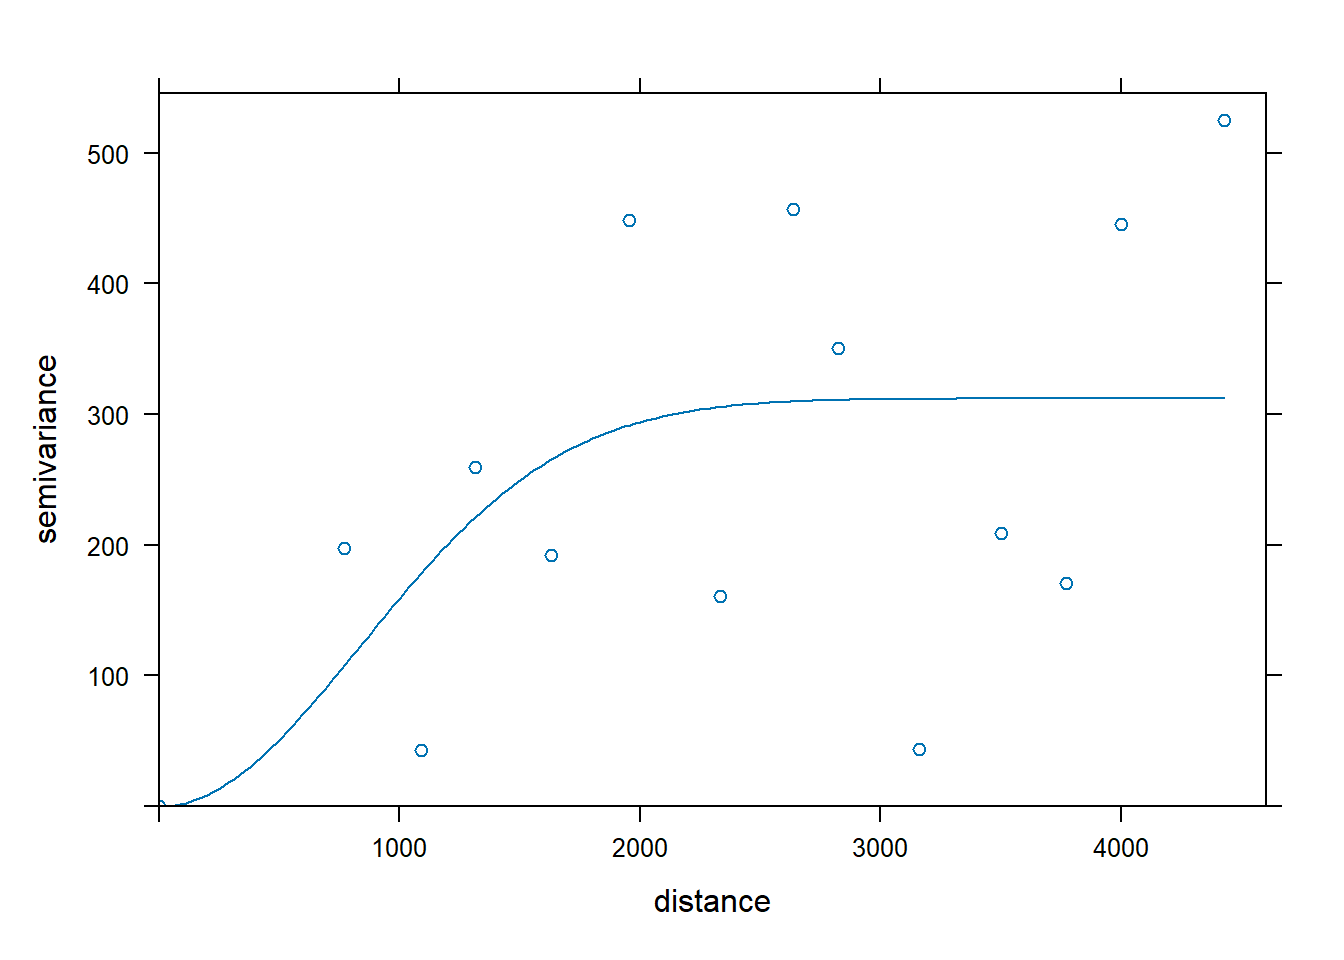 A variogram plotted for the sample data used in this example.